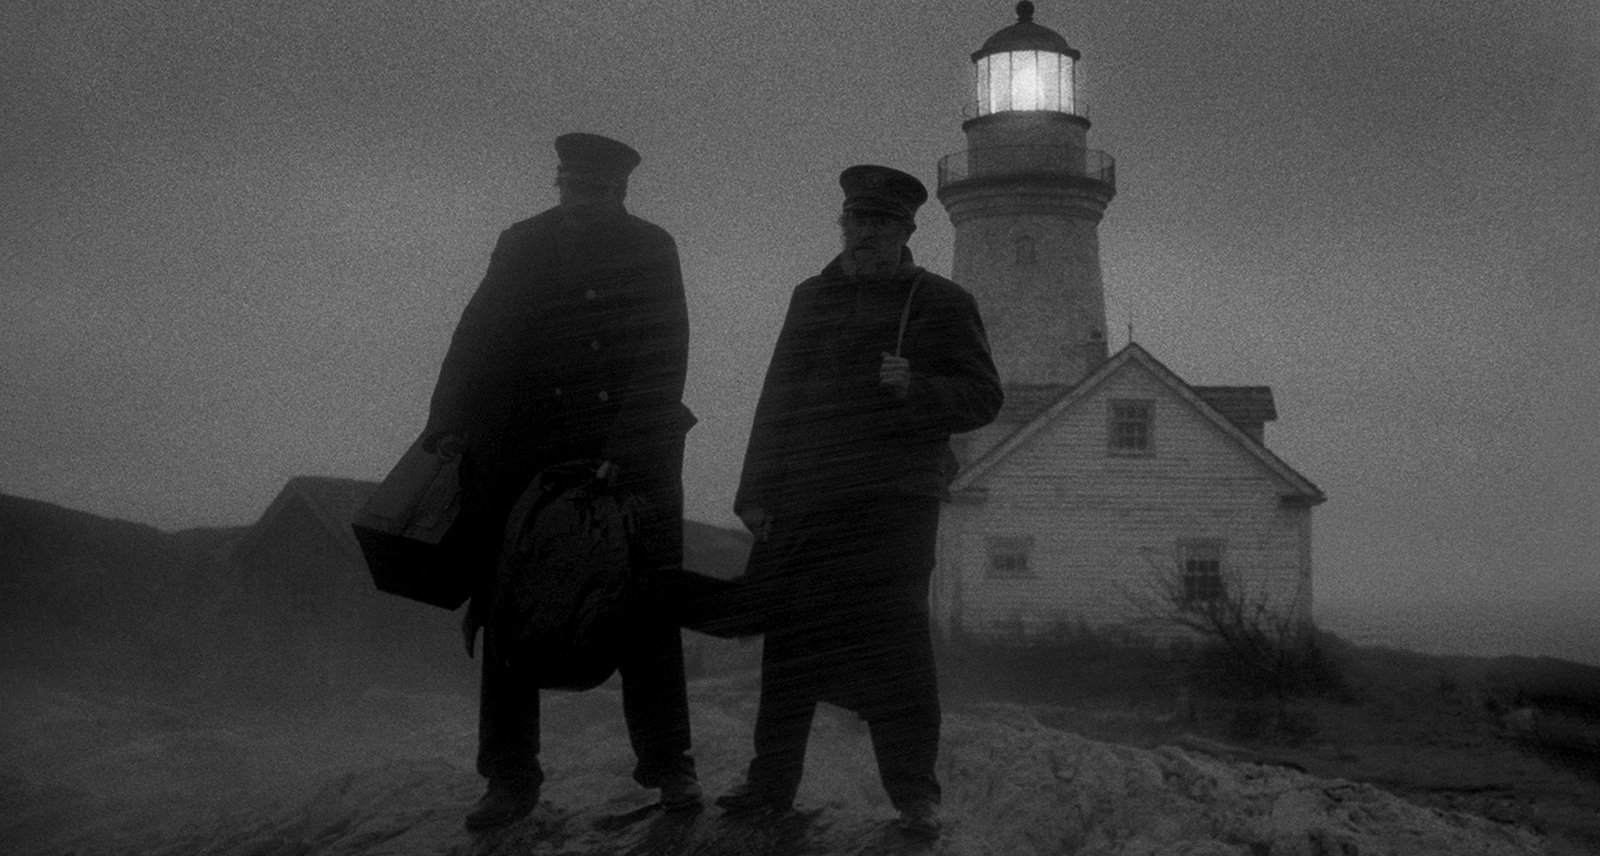 Two men on stand on rocks in front of a lighthouse on a grainy black and white photo